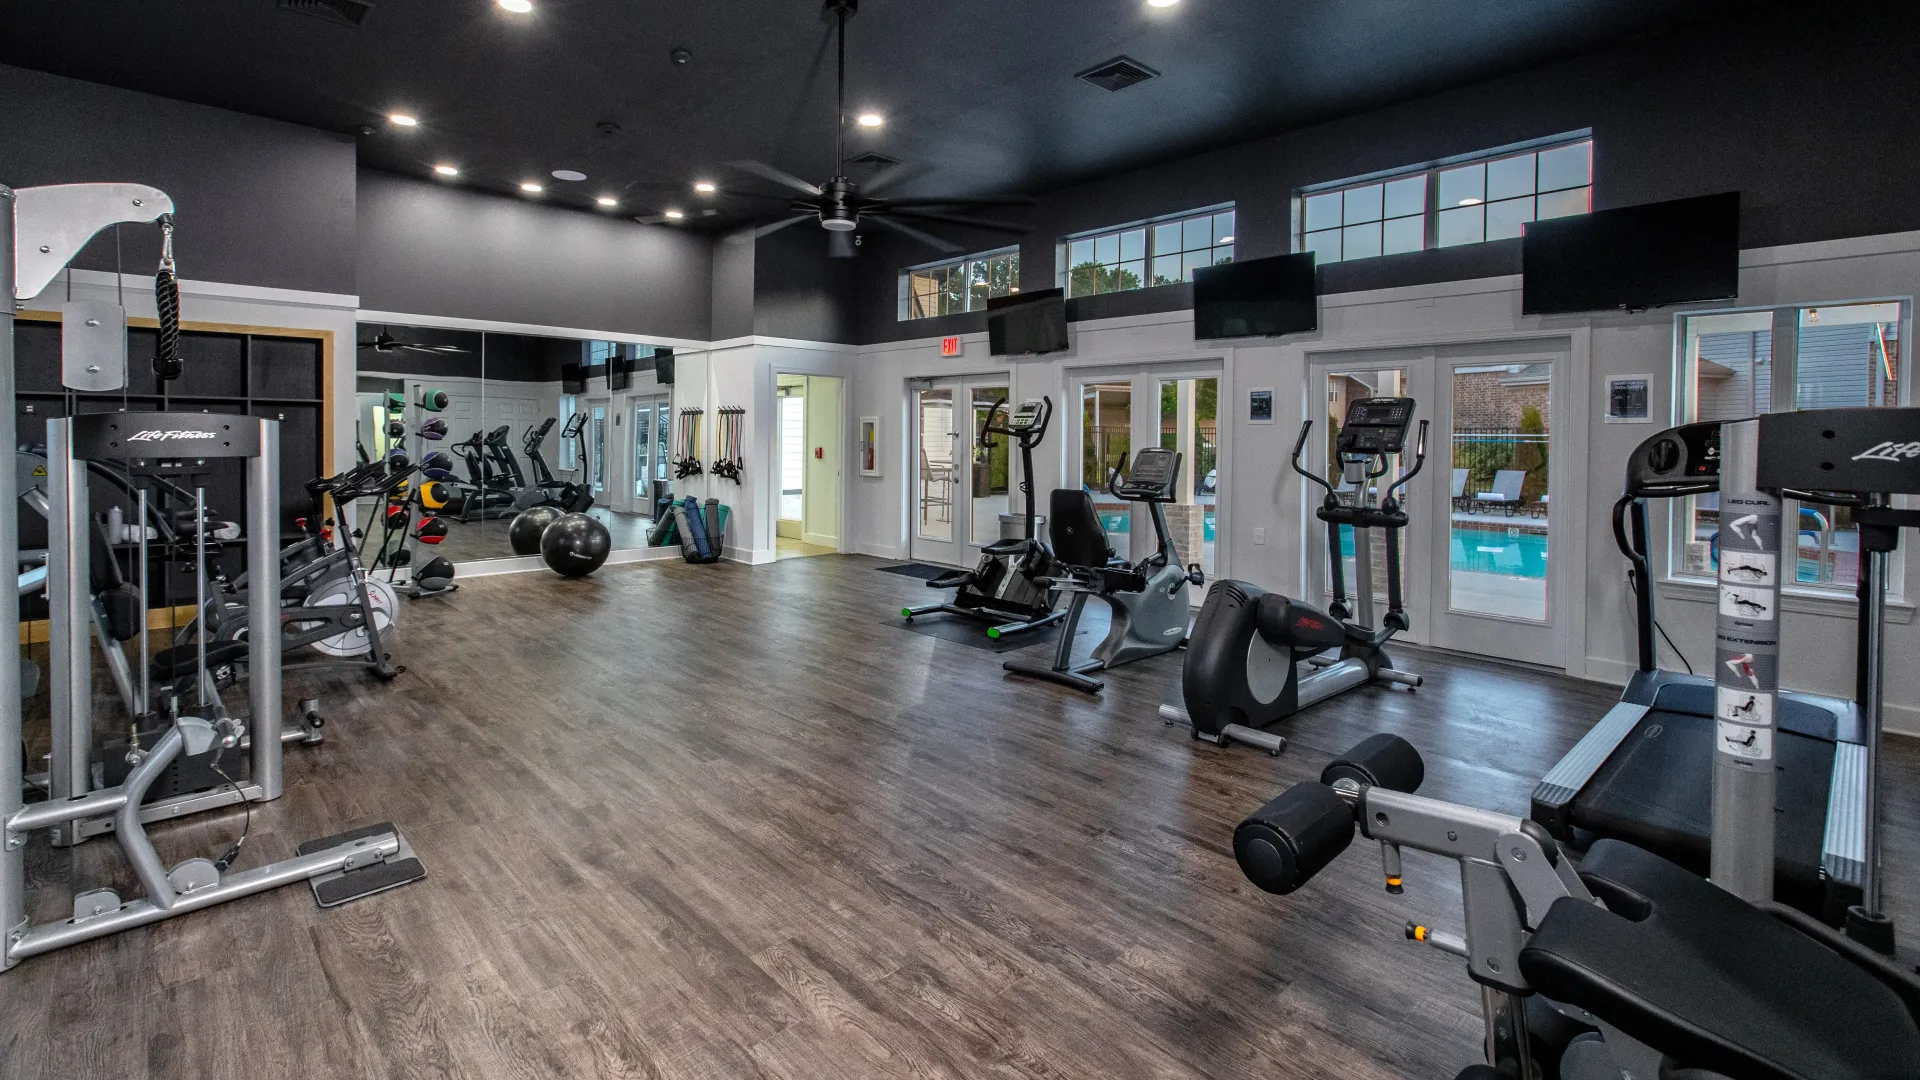 Bikes, ellipticals, treadmills, weight training machines, and free weights thoughtfully positioned throughout the spacious fitness center, accommodating a diverse community of residents and fitness goals. 